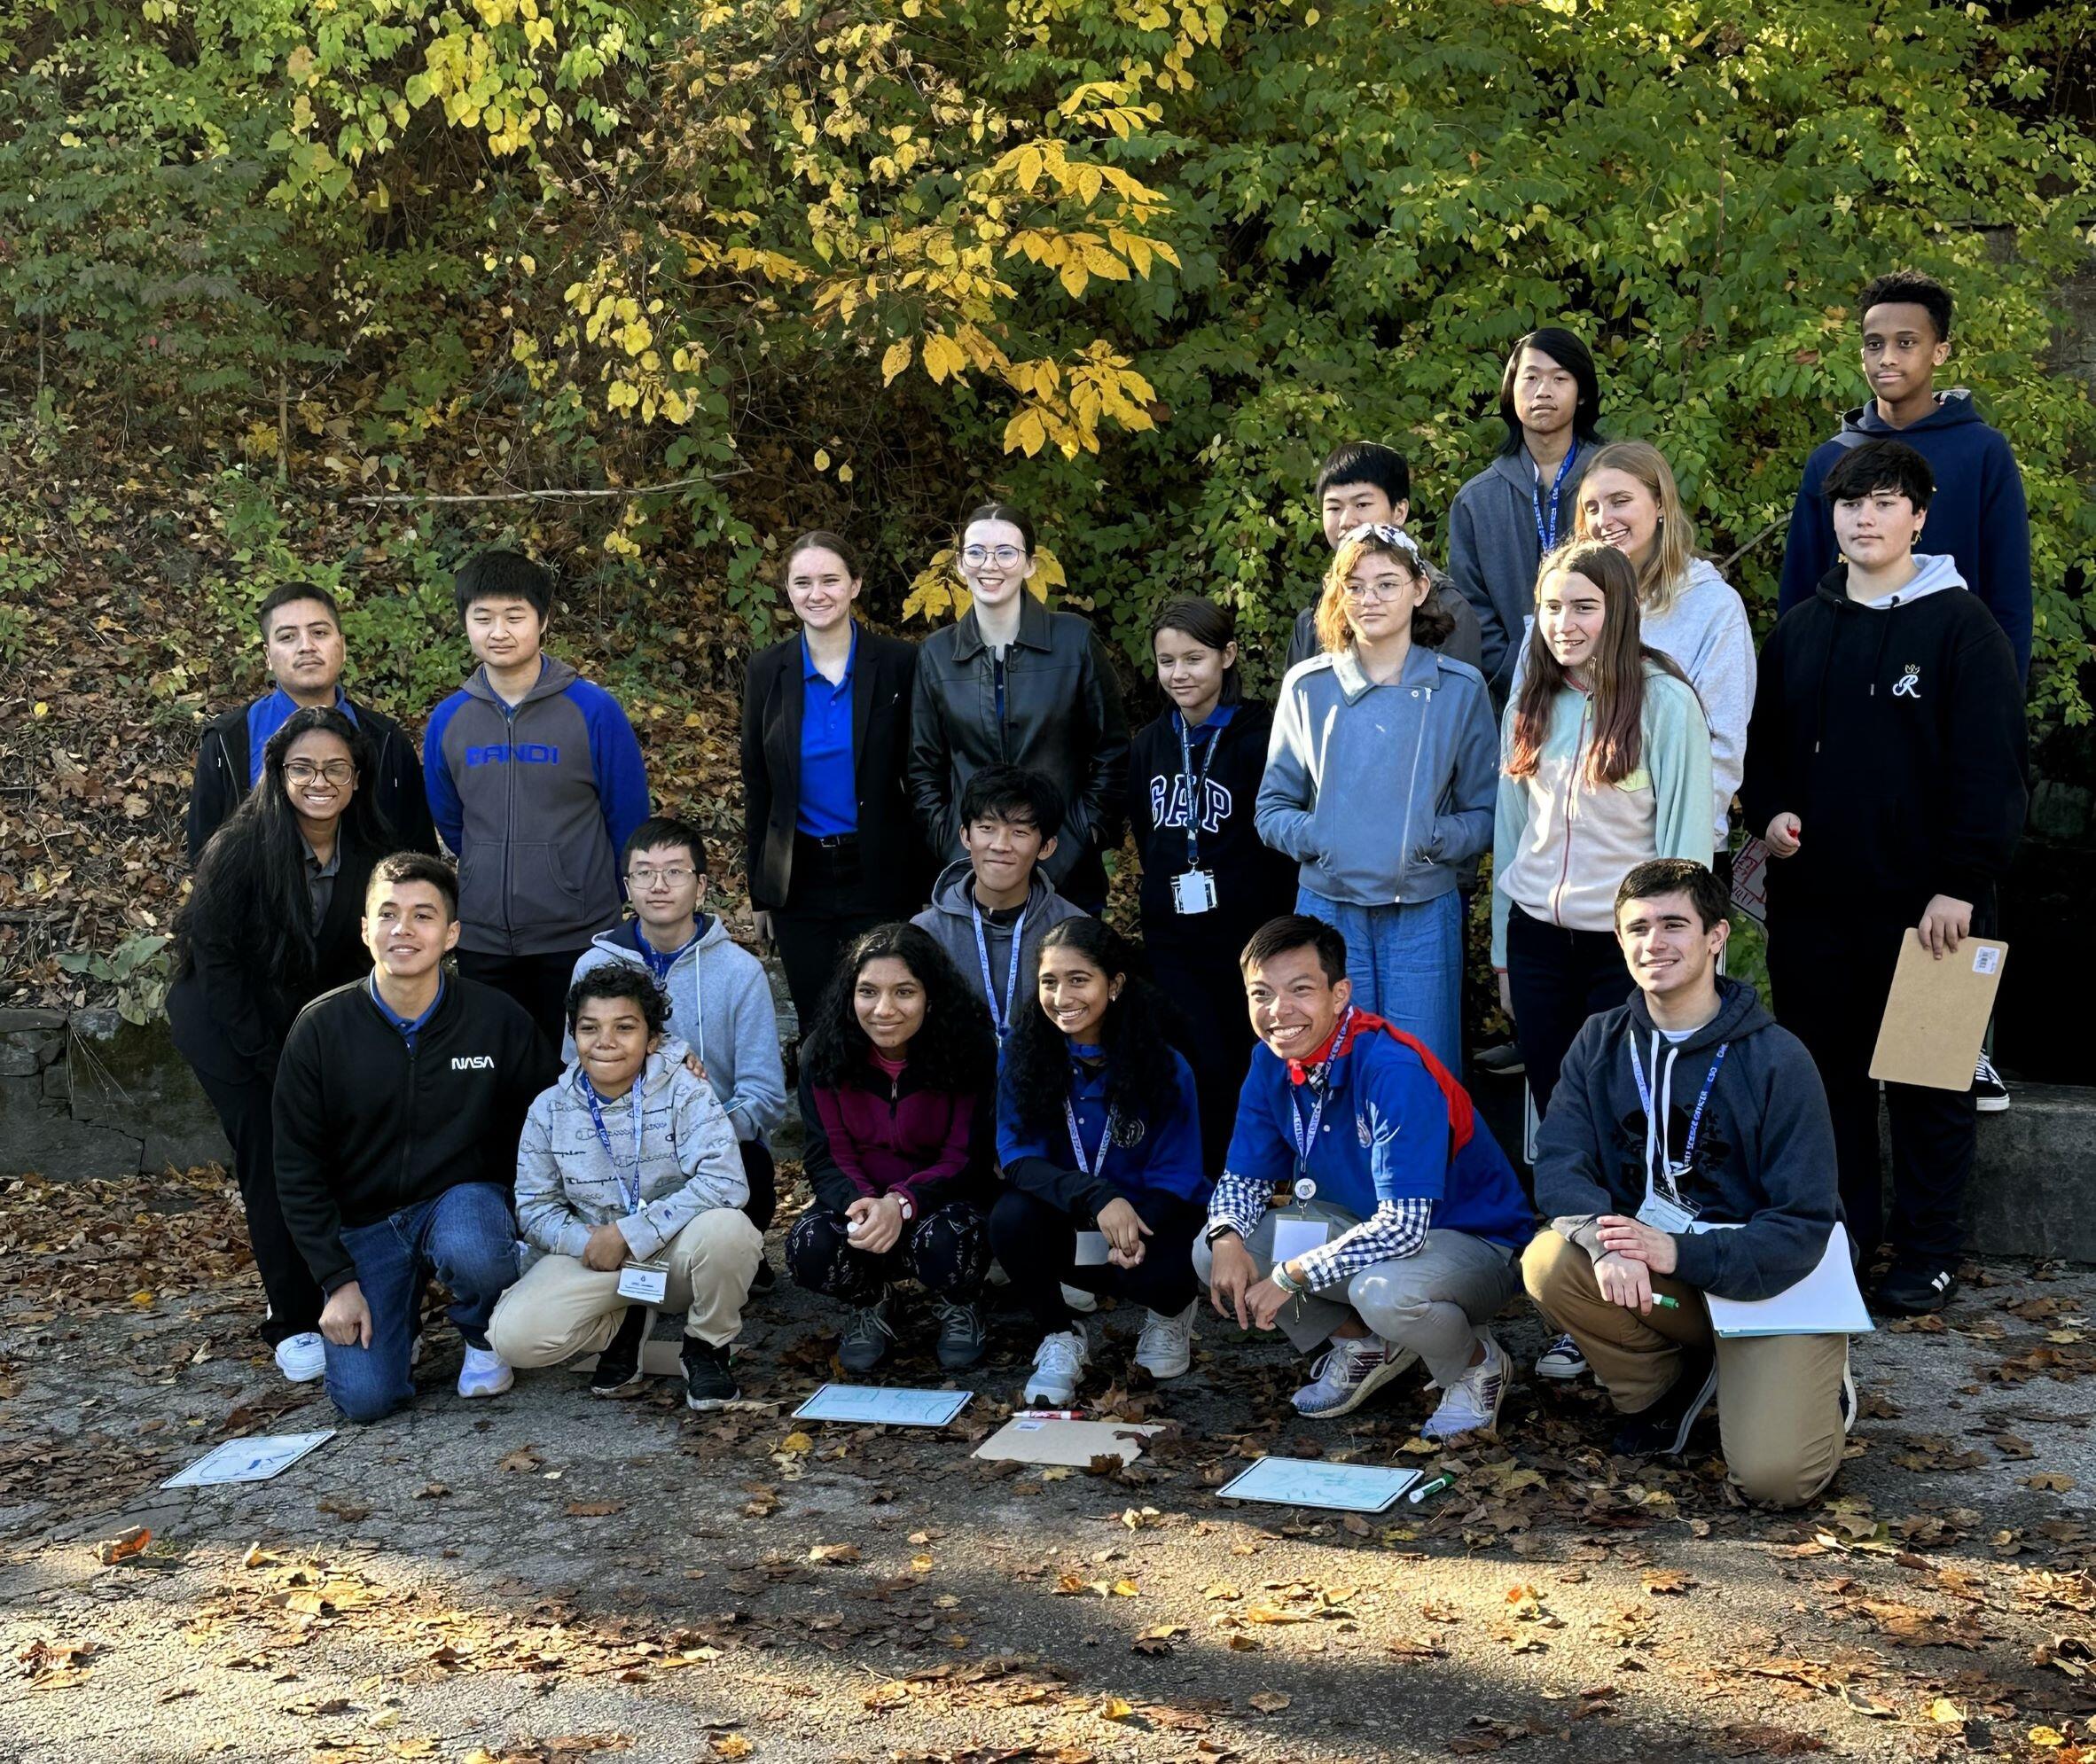 Class of students on field trip standing for a group photo in front of fall foliage